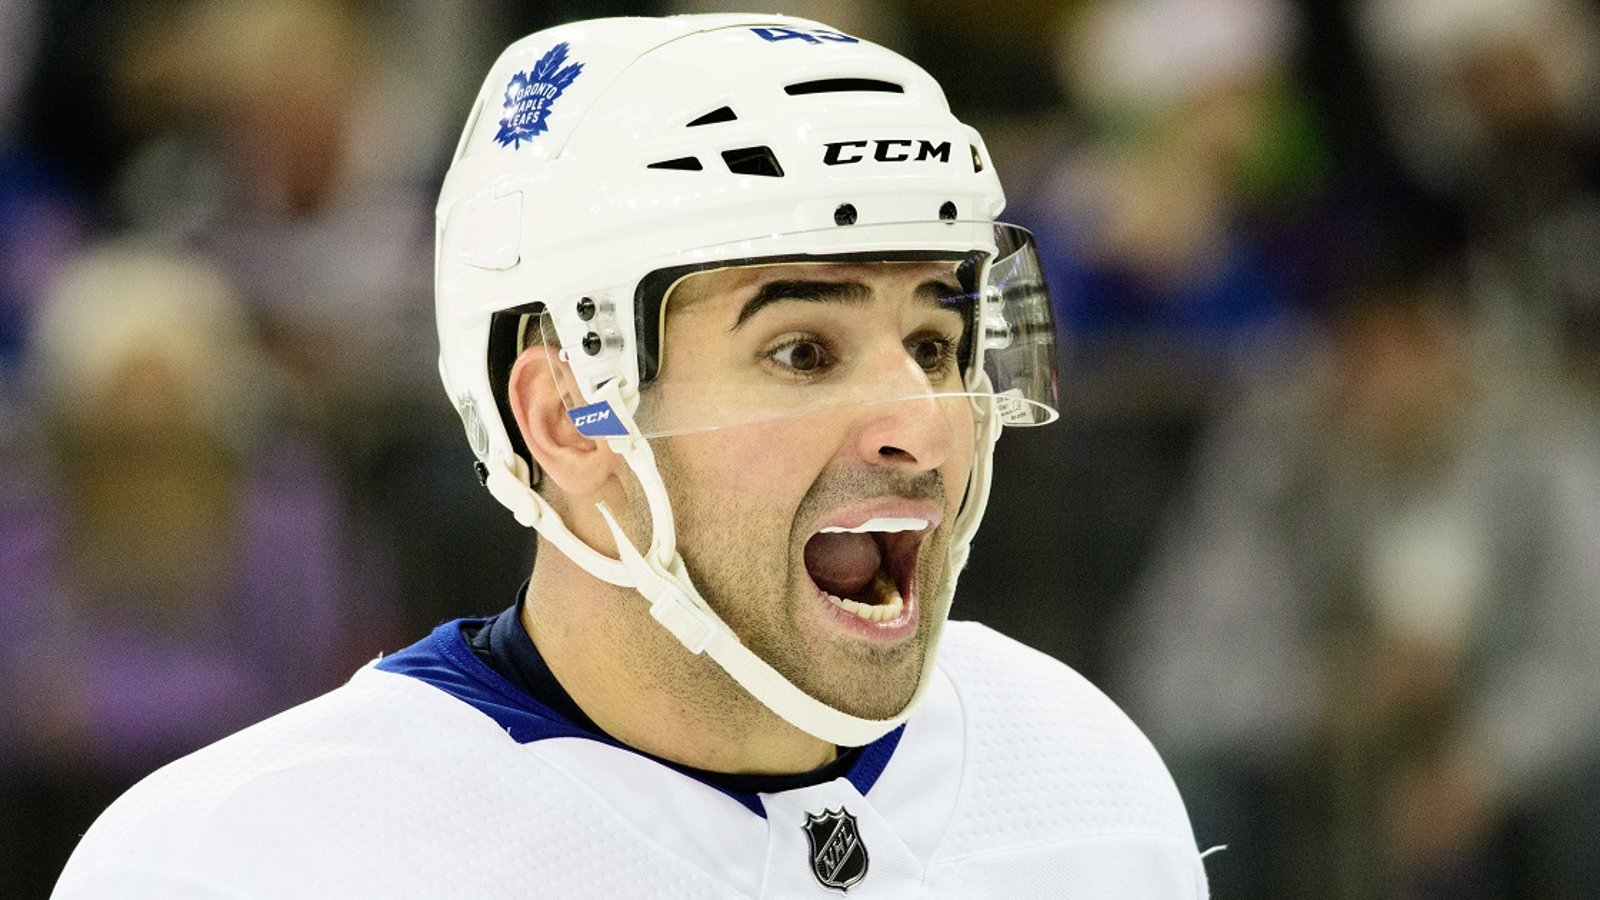 Breaking: Early signs point to a major suspension for Nazem Kadri.